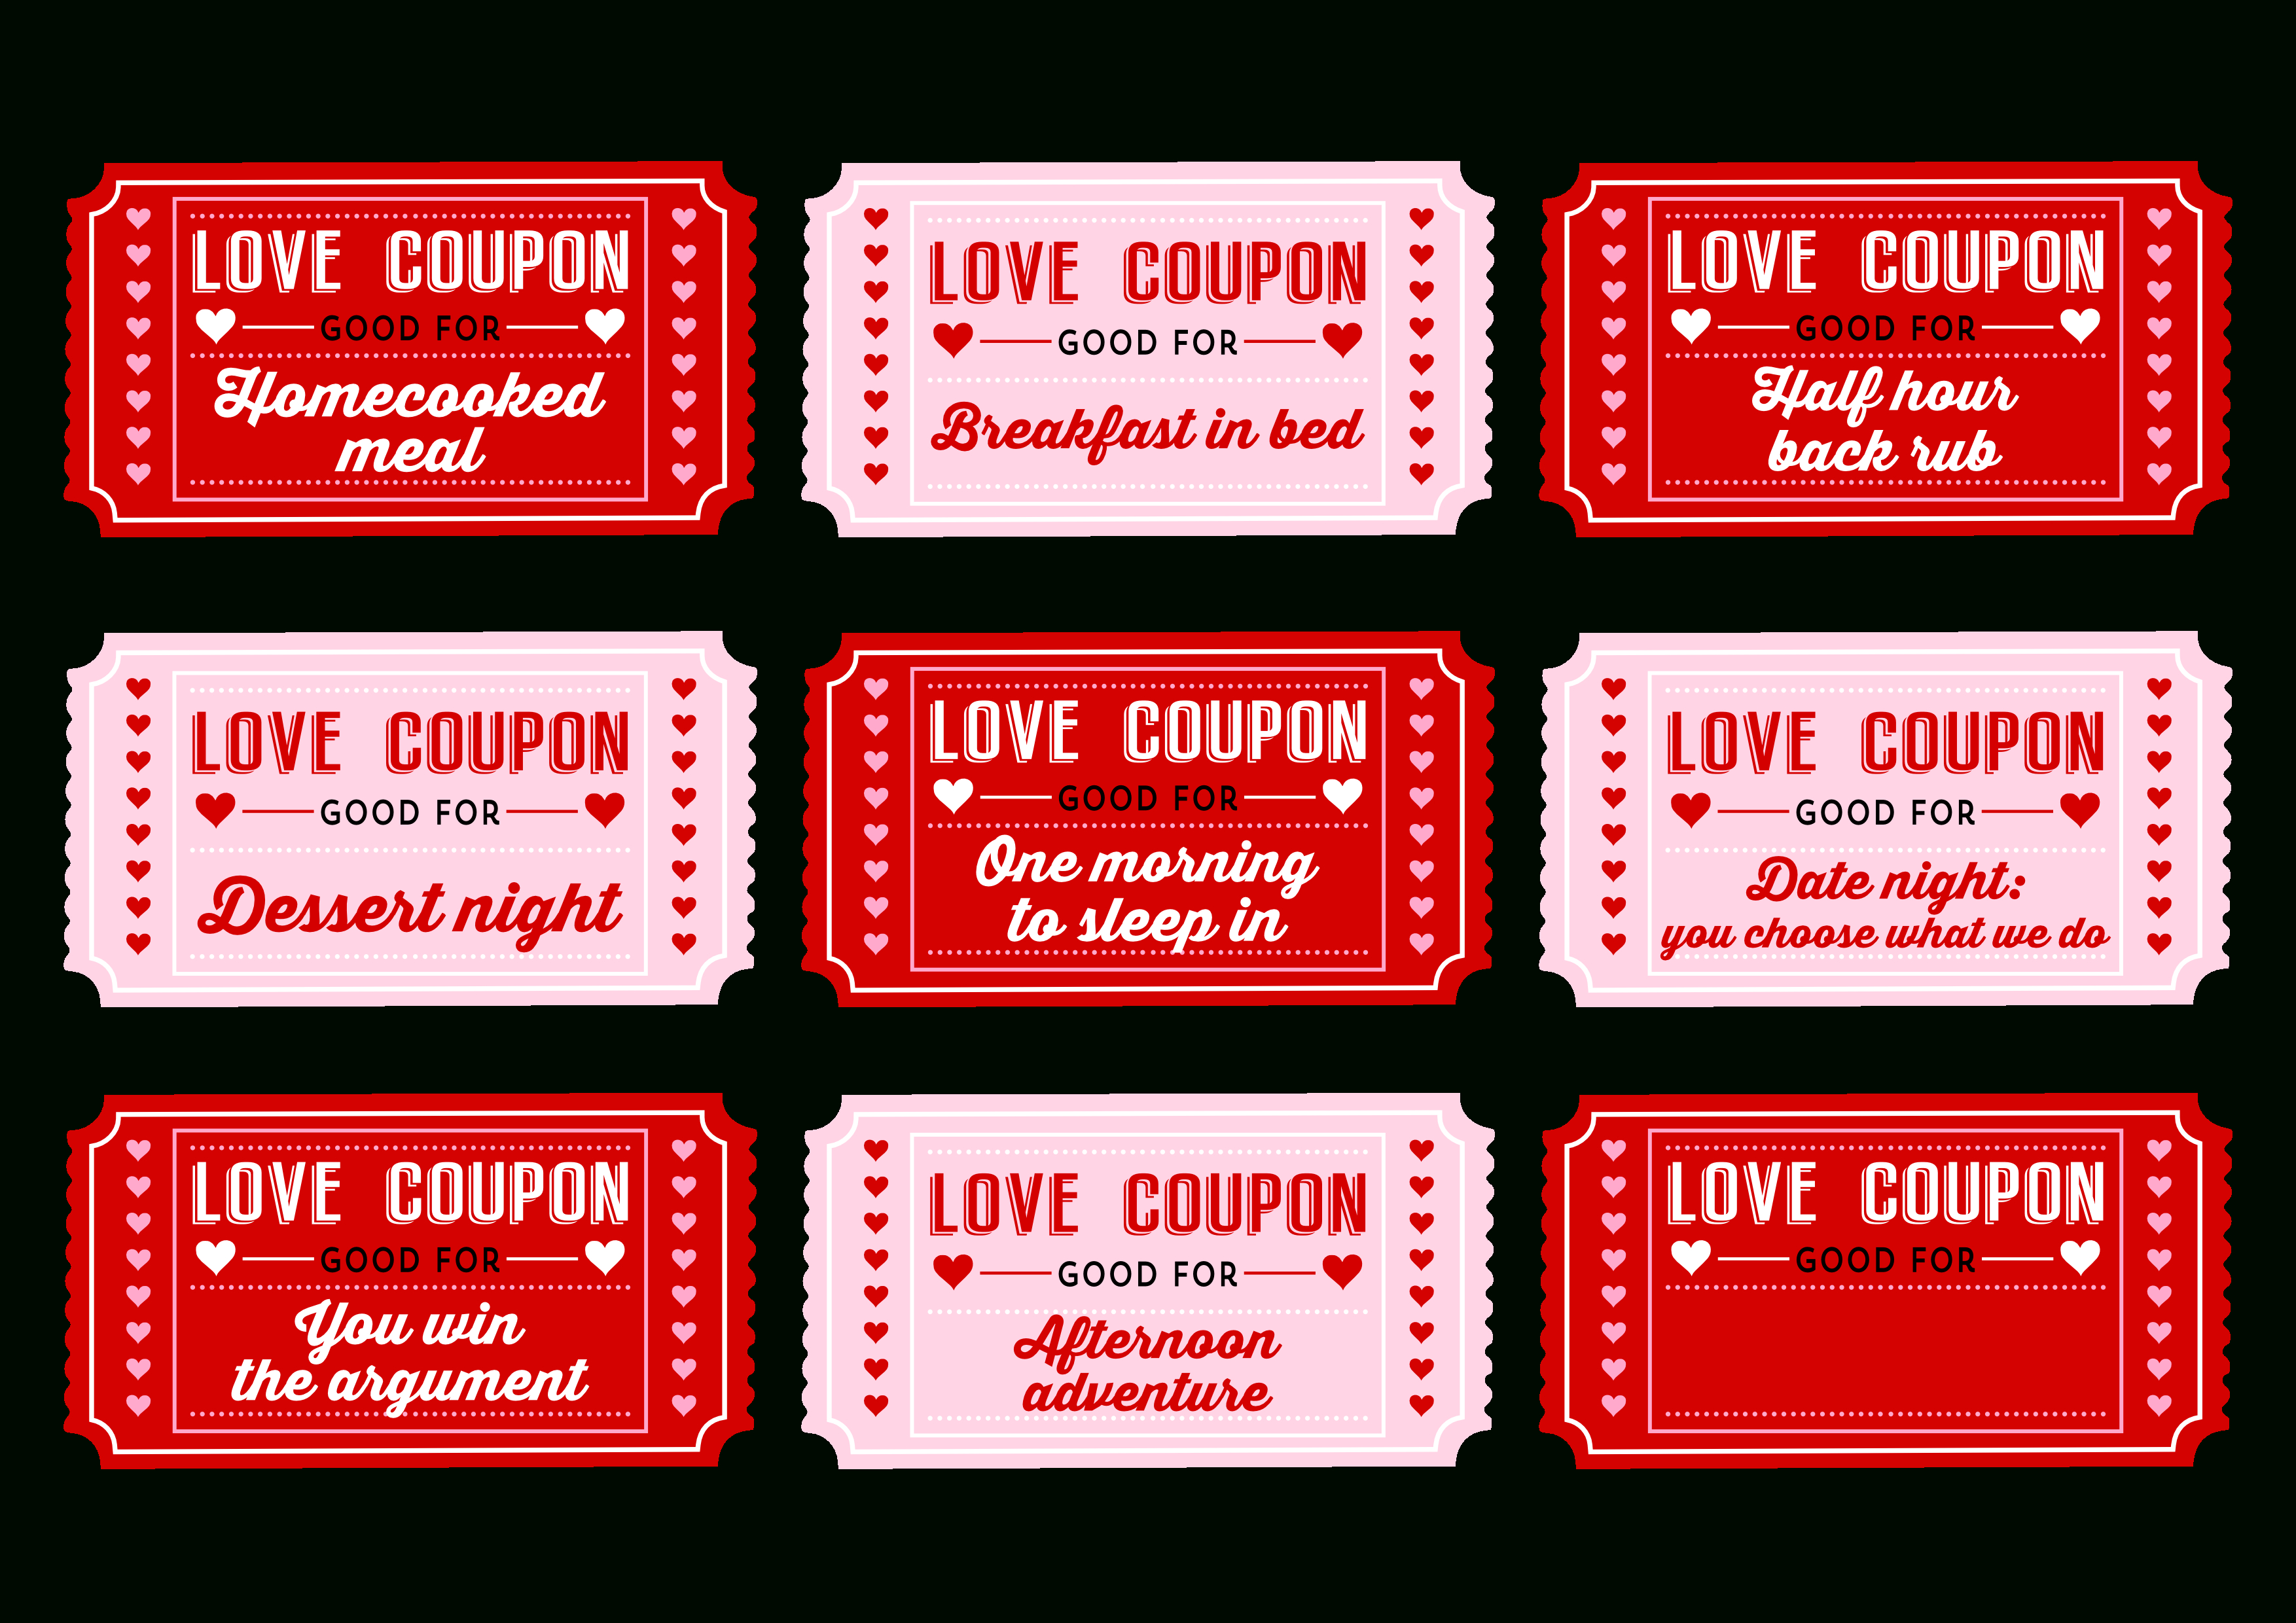 Free Printable Love Coupons For Couples On Valentine&amp;#039;s Day! | Catch - Free Printable Love Coupons For Wife